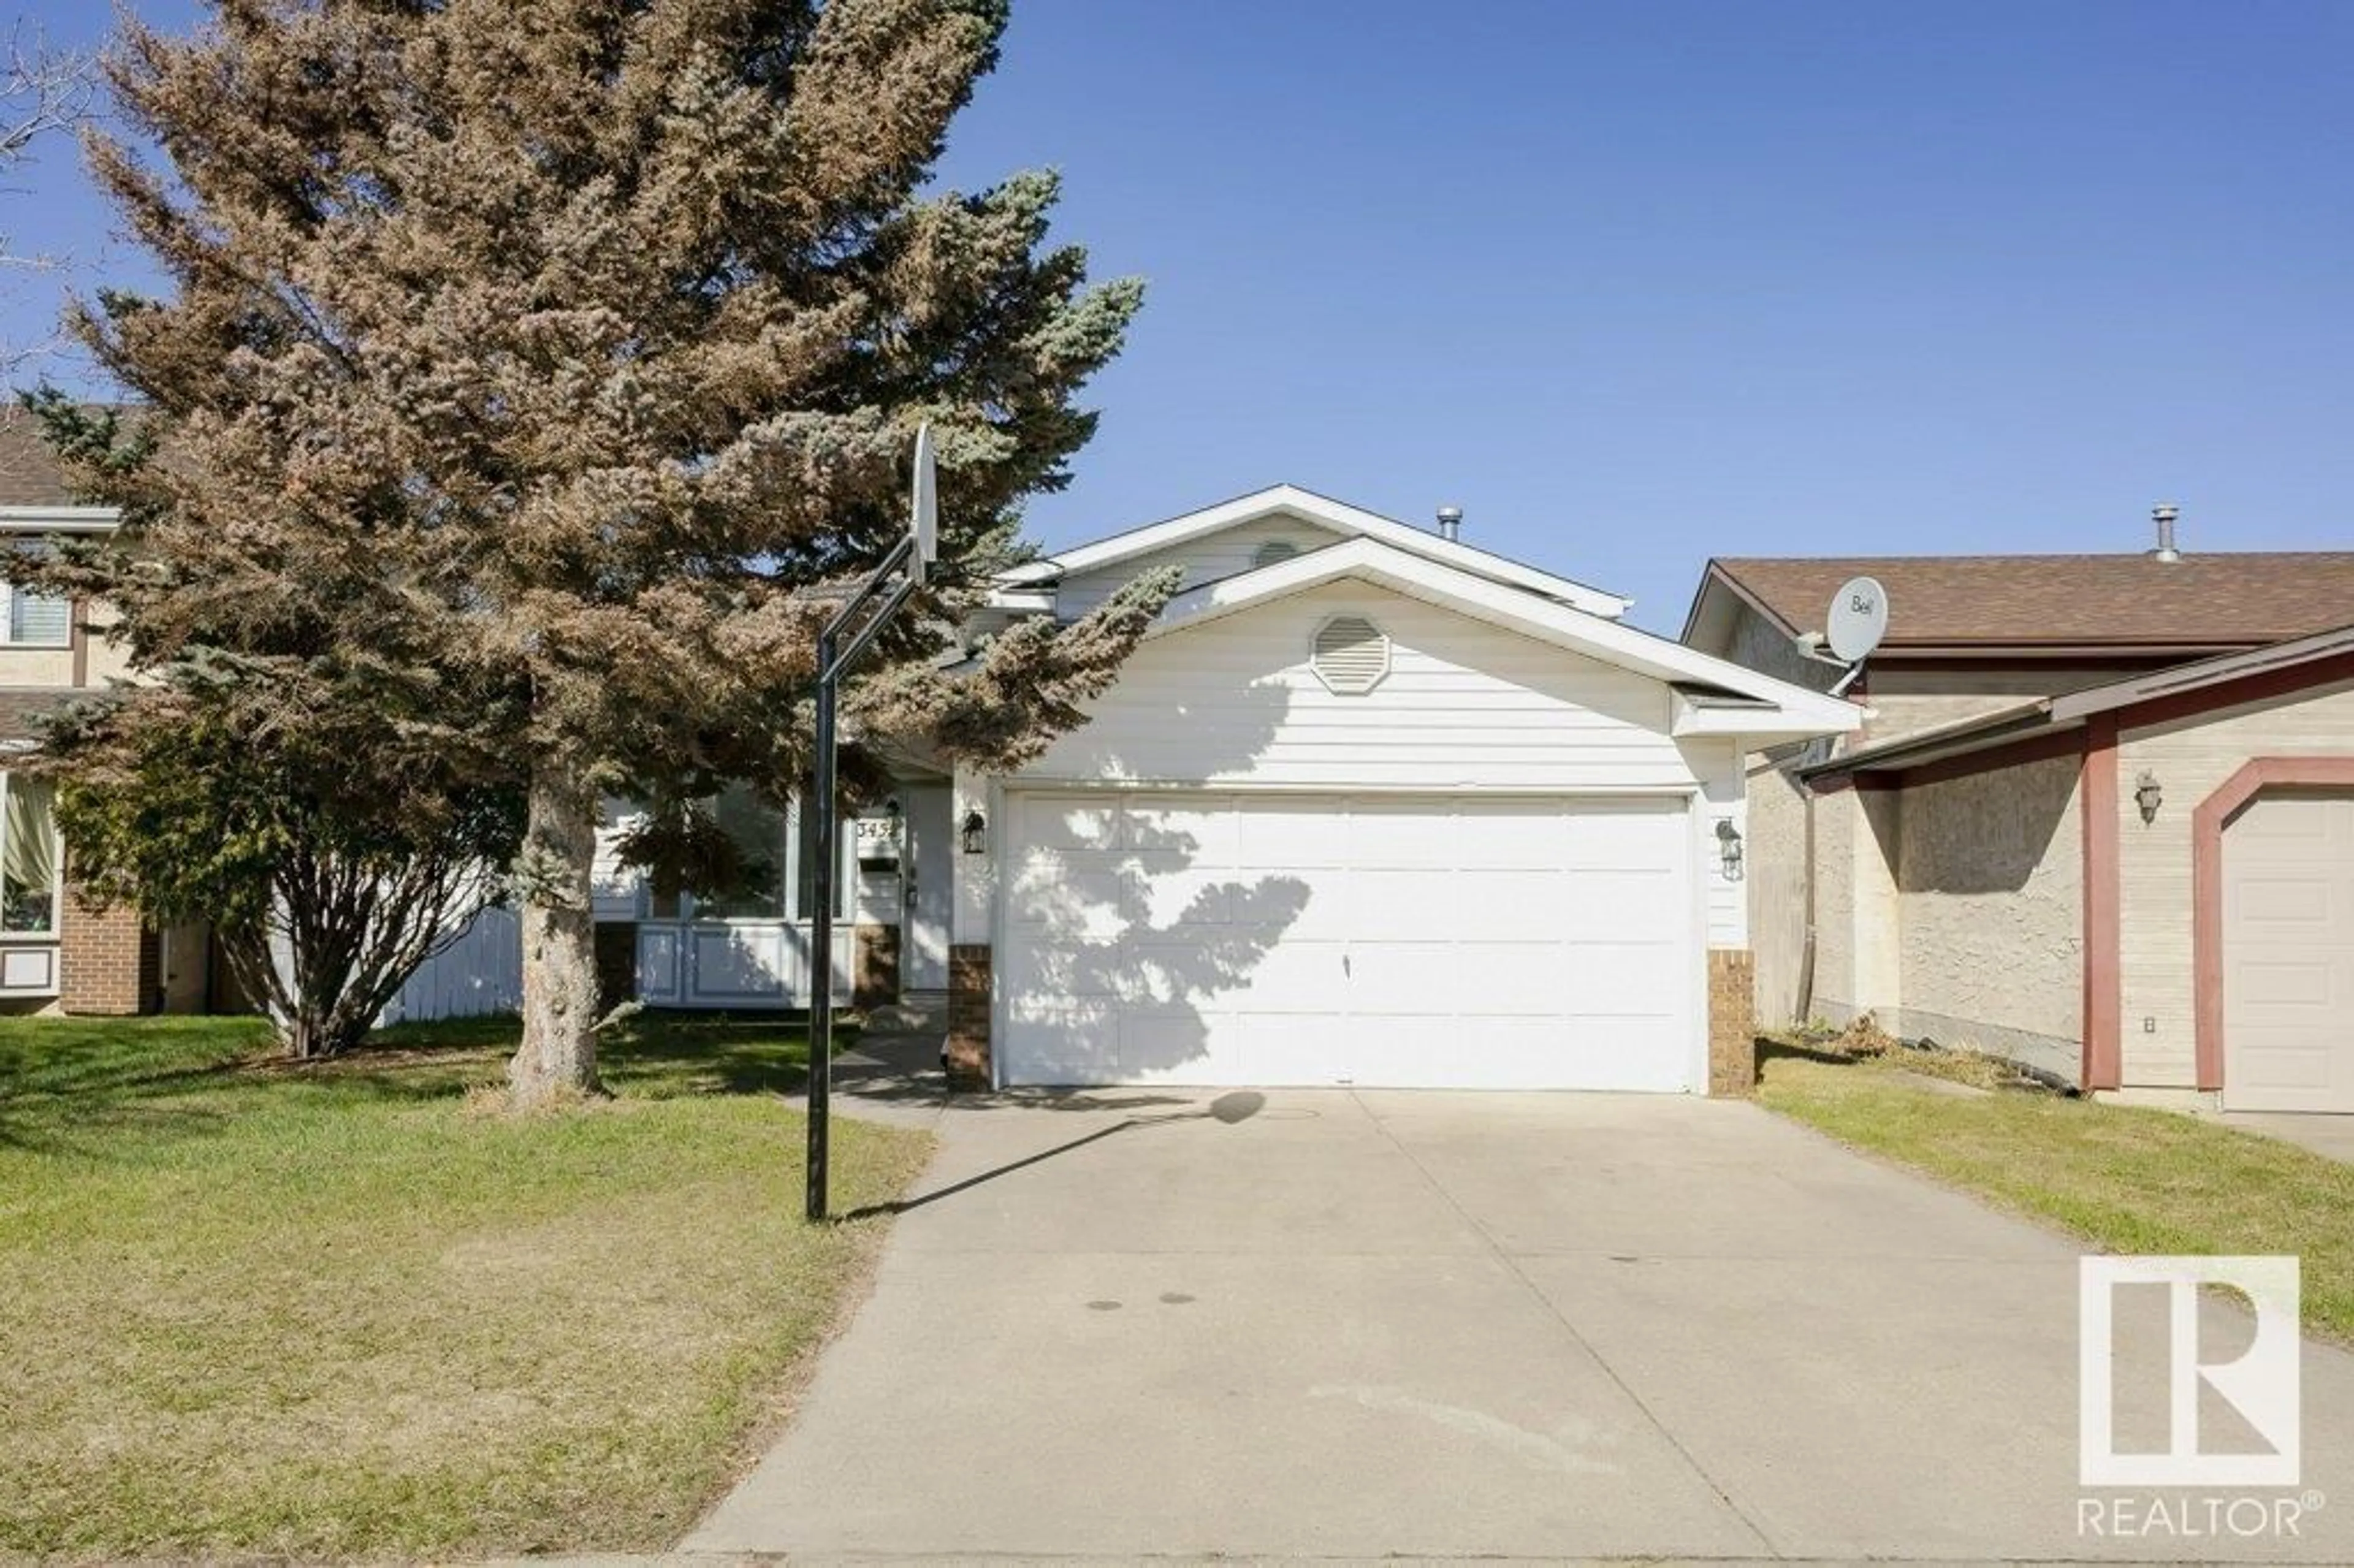 Frontside or backside of a home for 3452 38 ST NW, Edmonton Alberta T6L4Z3